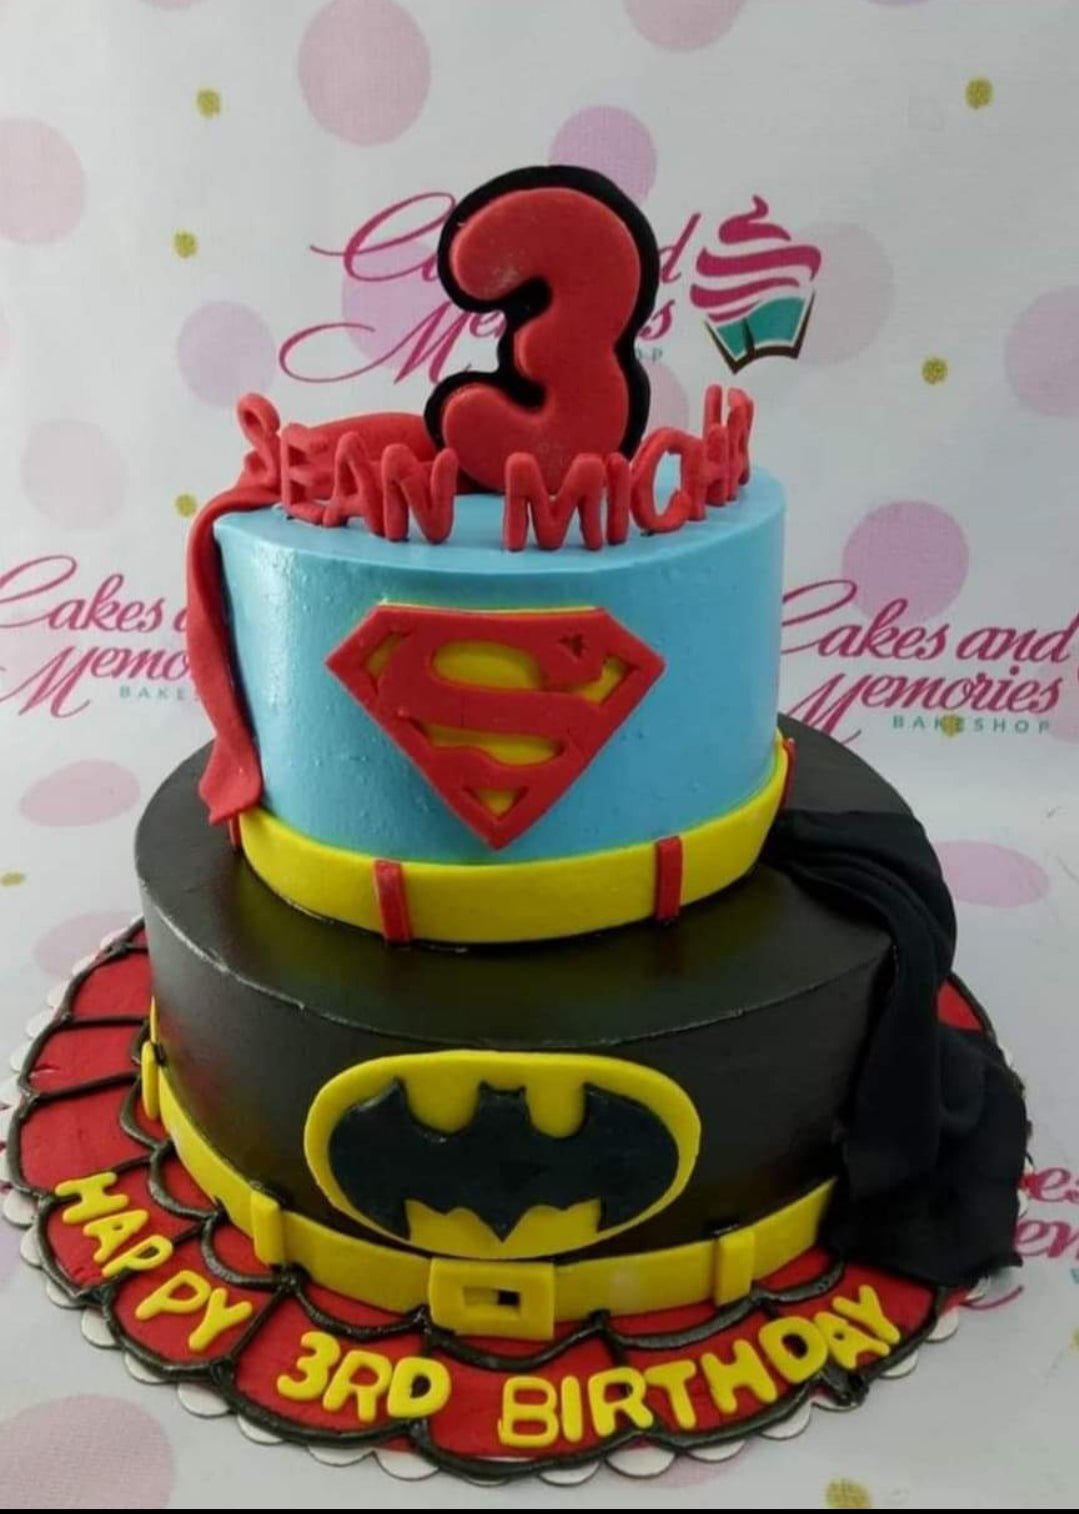 Masters Cakes - 2 tier Batman/Superman cake. Happy 5th Birthday Melchizedek  from Masters Cakes. | Facebook